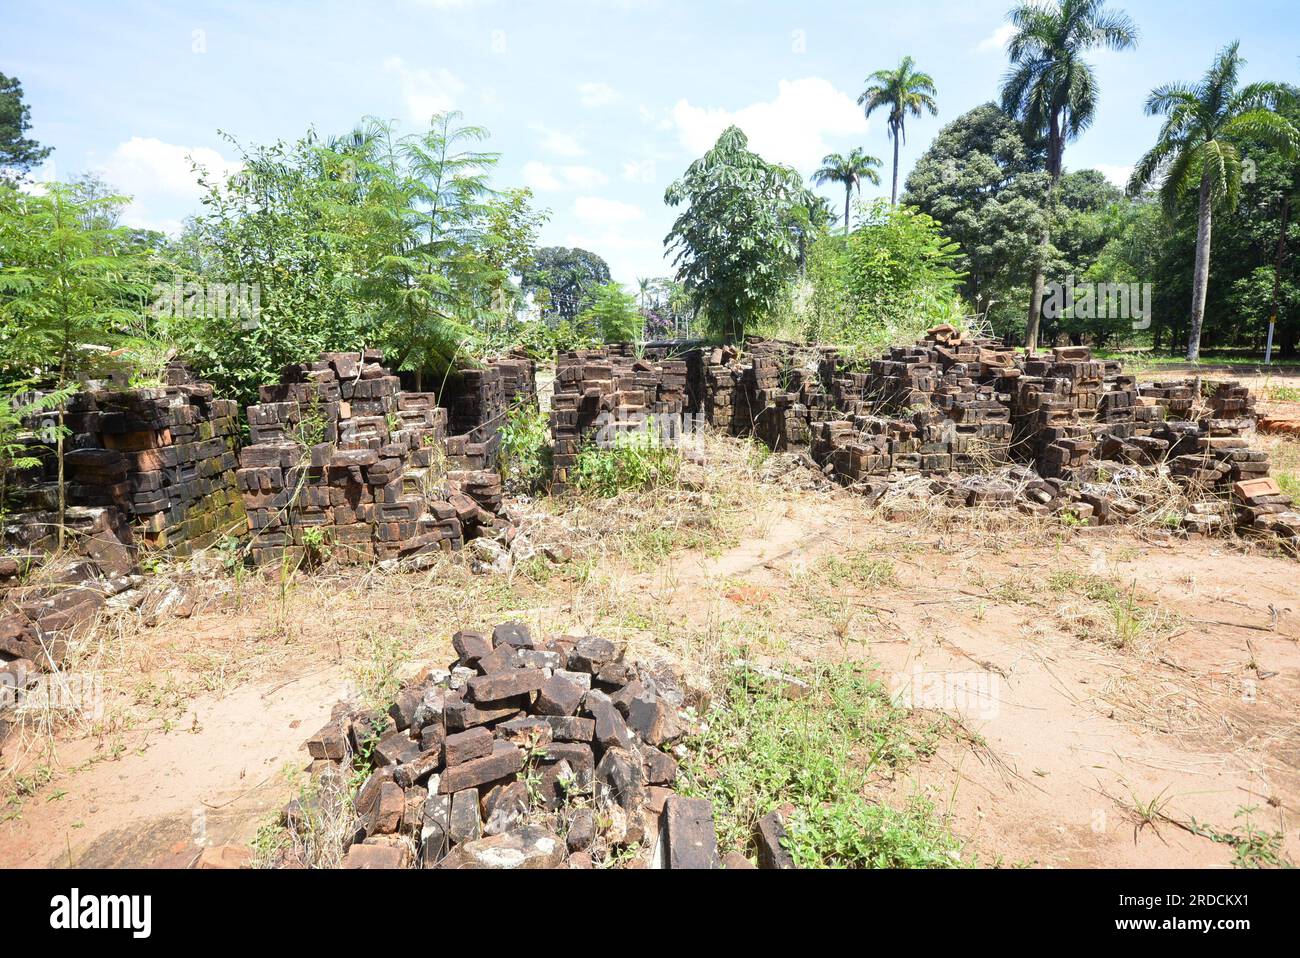 Piles of old unused bricks outdoors with great wear and tear in the background tropical tree vegetation Stock Photo